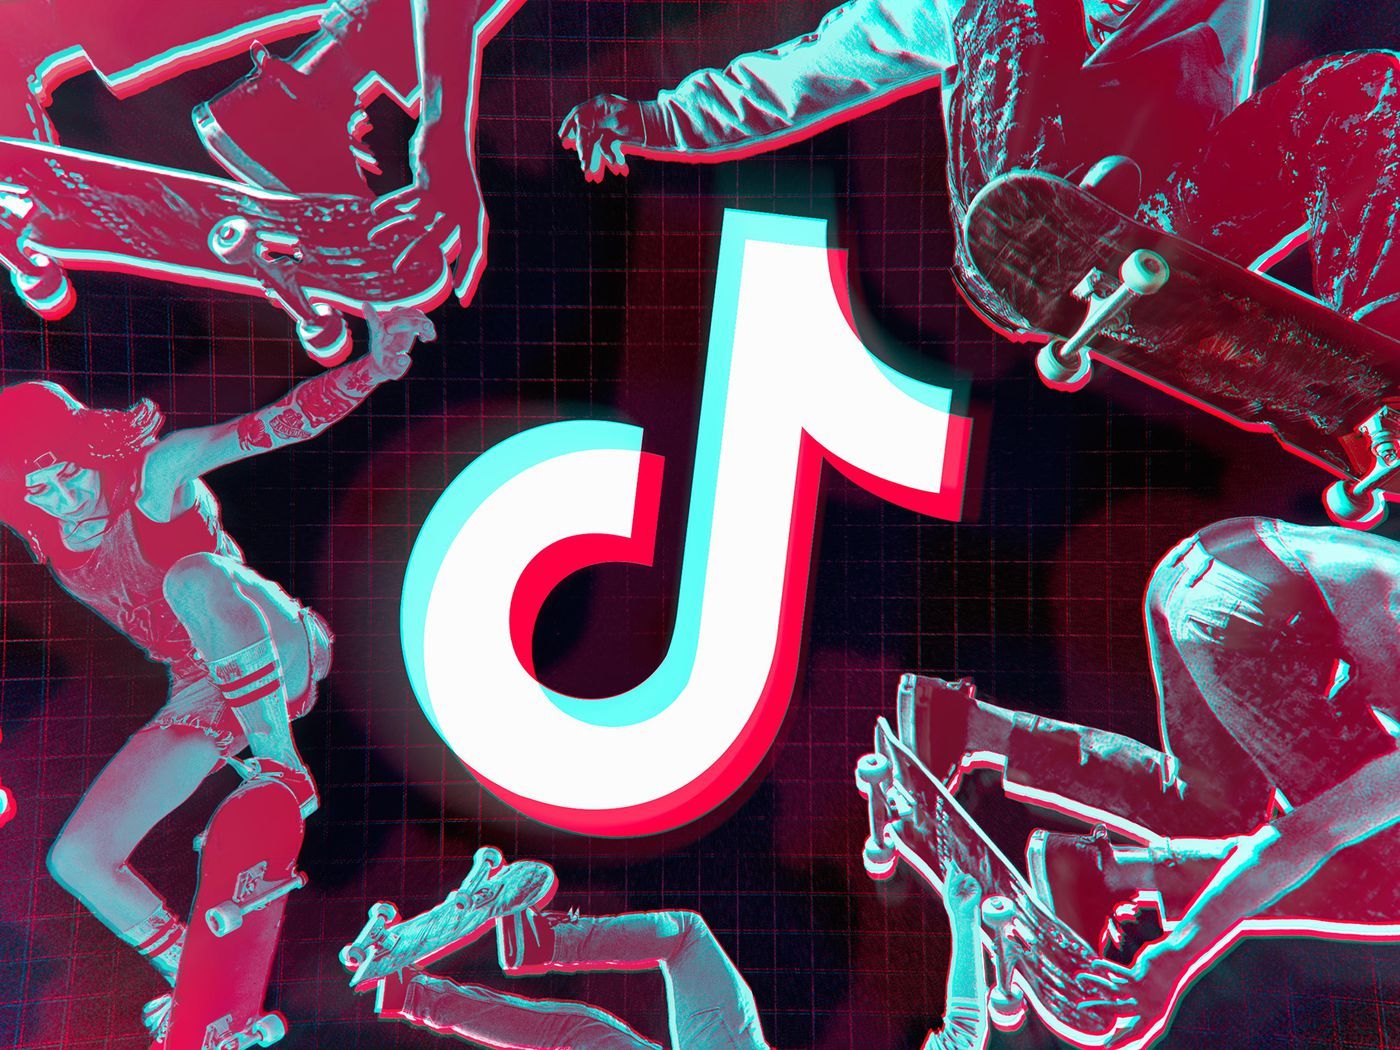 The legacy of the skate video lives on in TikTok